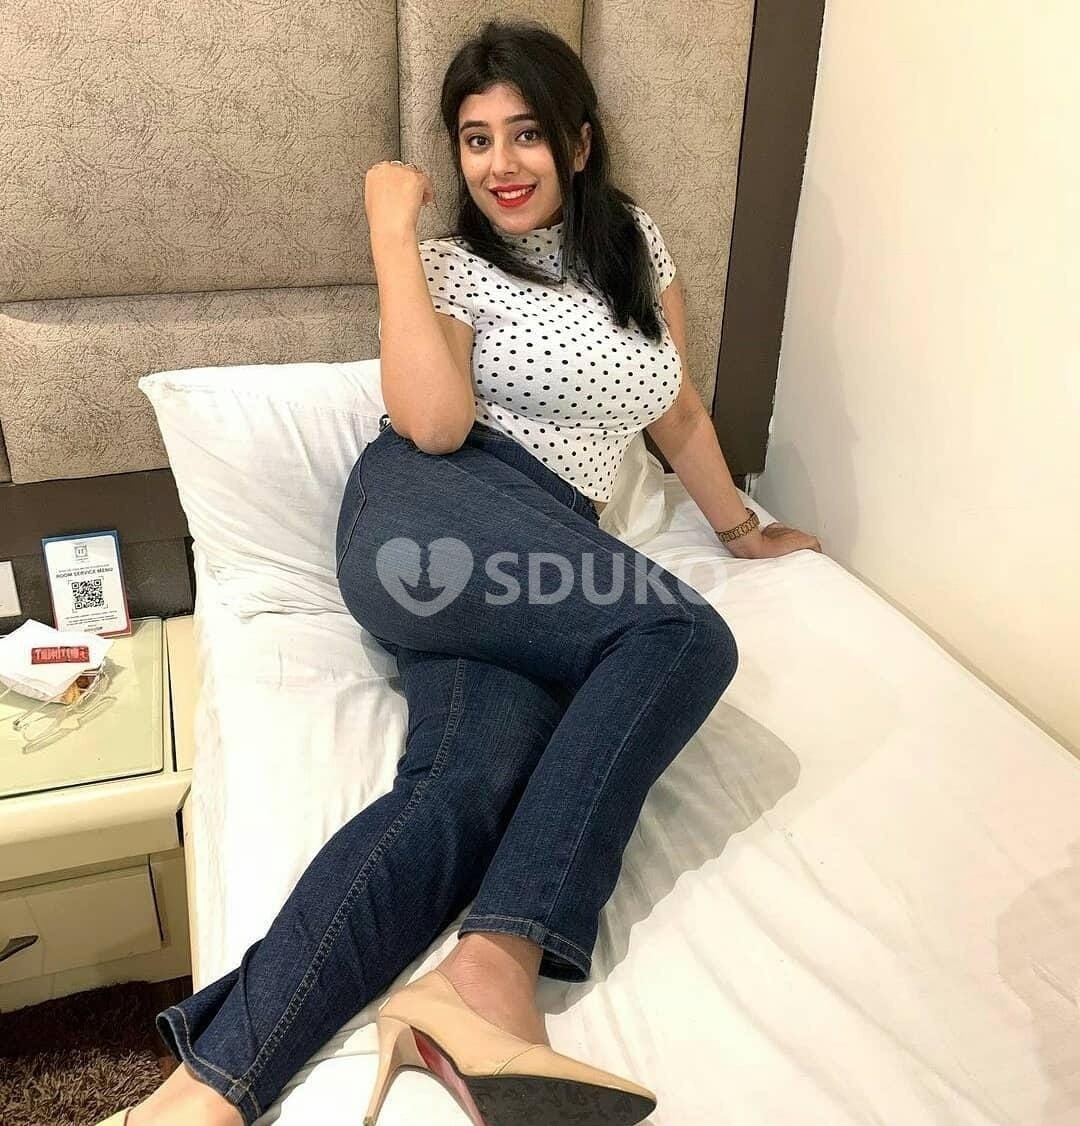 NEW TOWN.♥️ MYSELF SWETA CALL GIRL & BODY-2-BODY MASSAGE SPA SERVICES OUTCALL OUTCALL INCALL 24 HOURS...